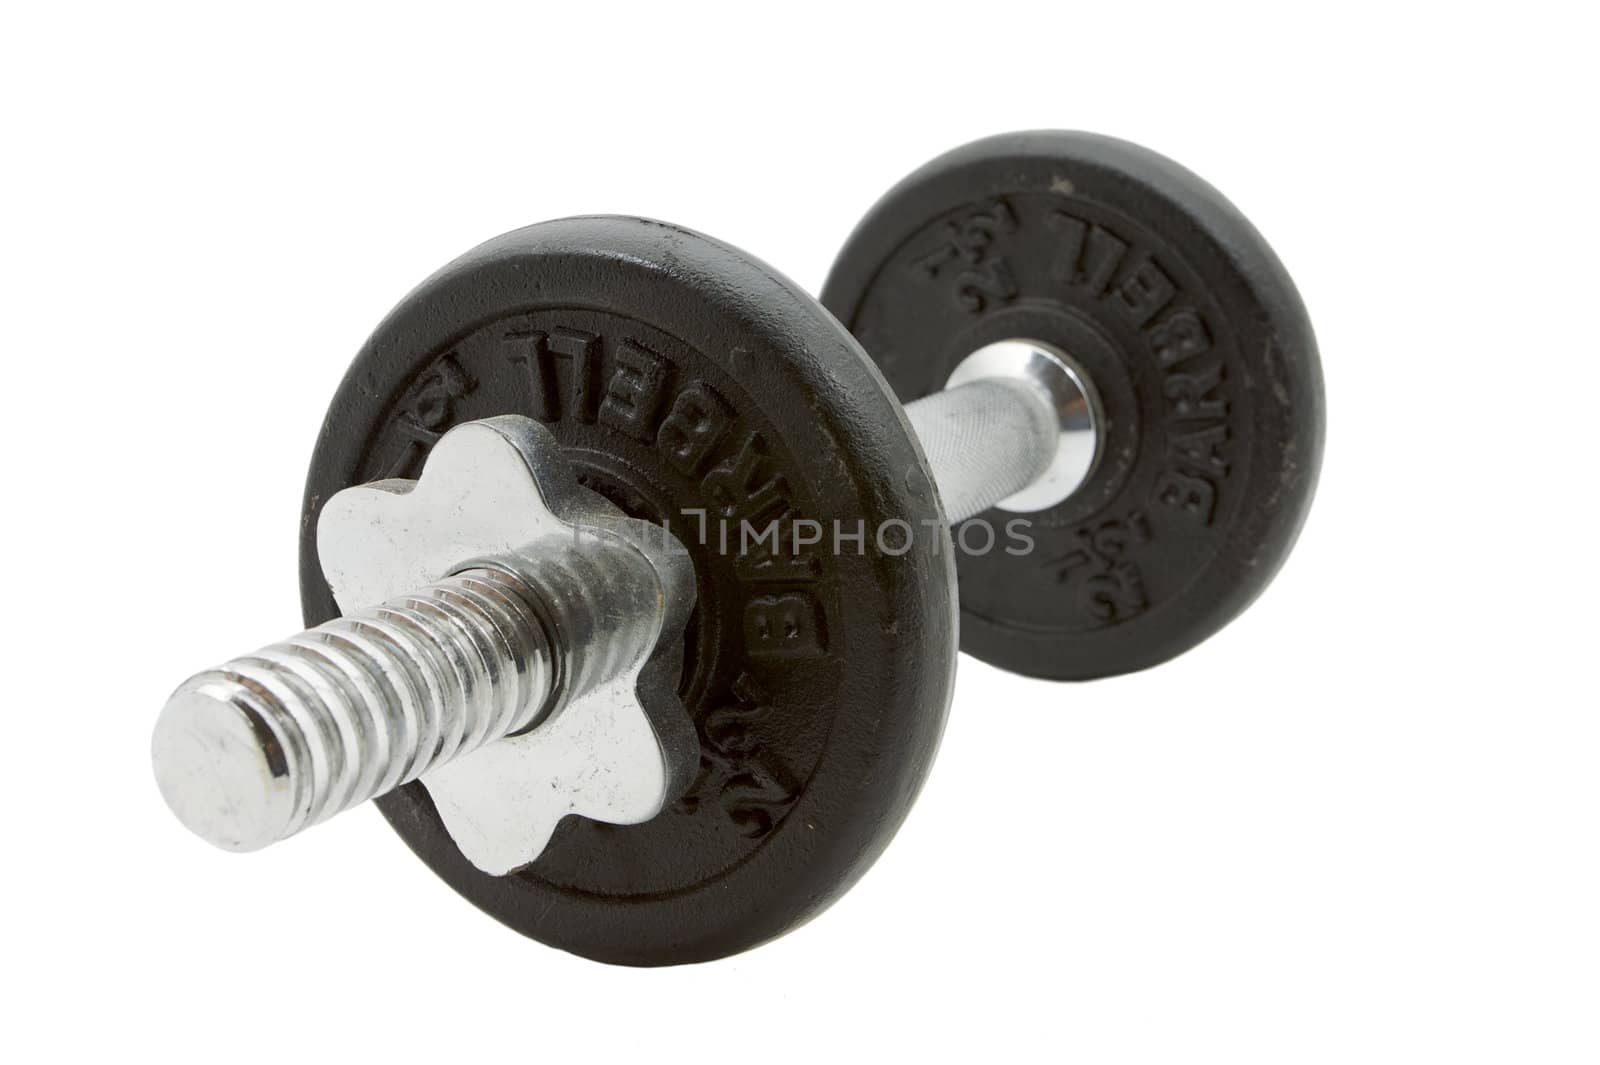 a set of isolated black and chrome weights isolated on a white background